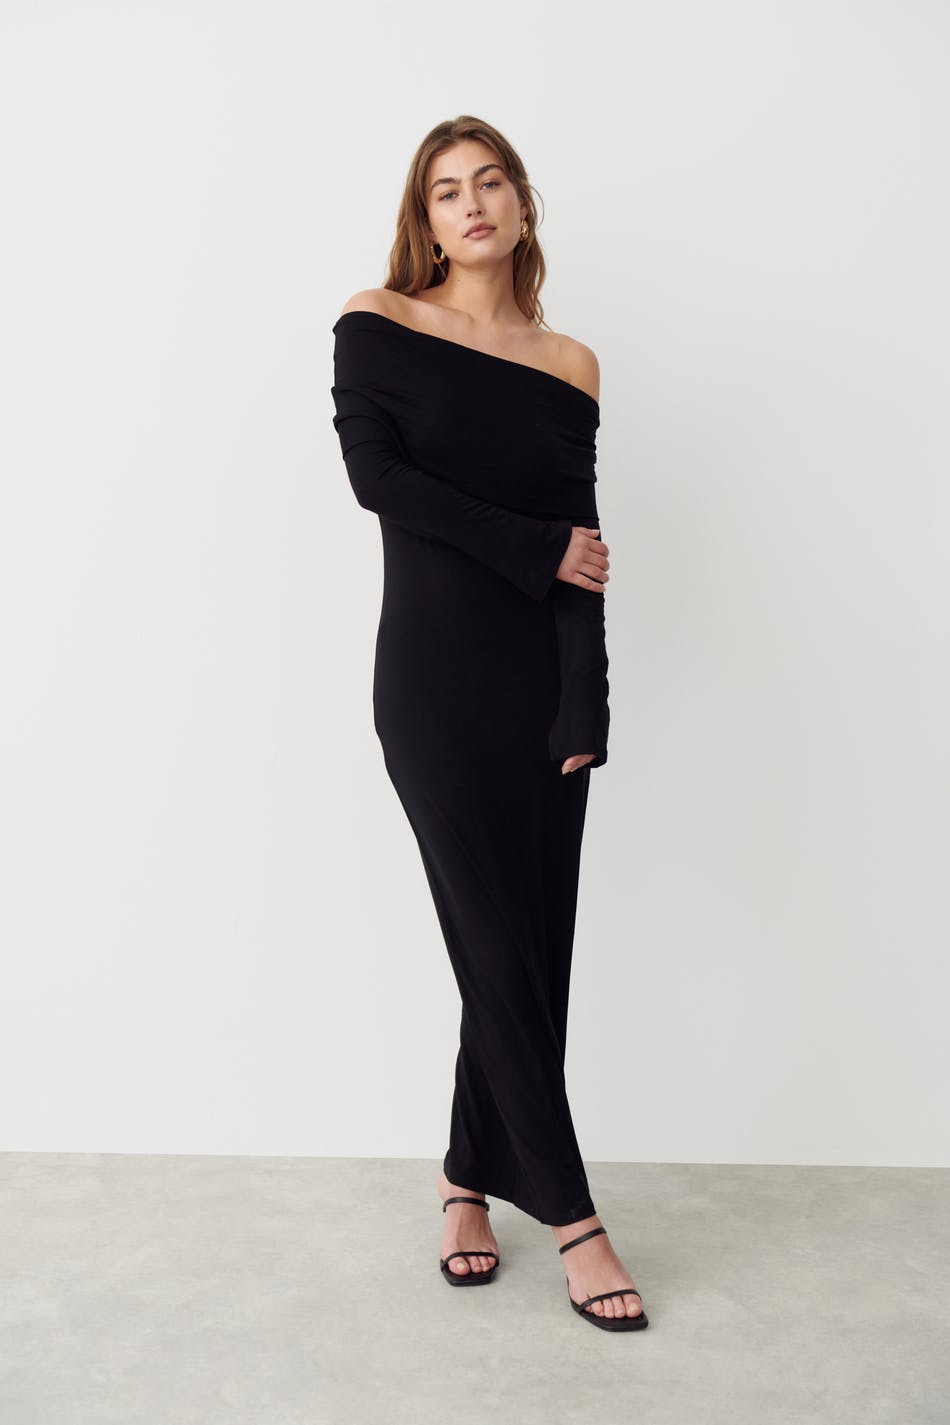 Soft touch maxi dress, Gina Tricot